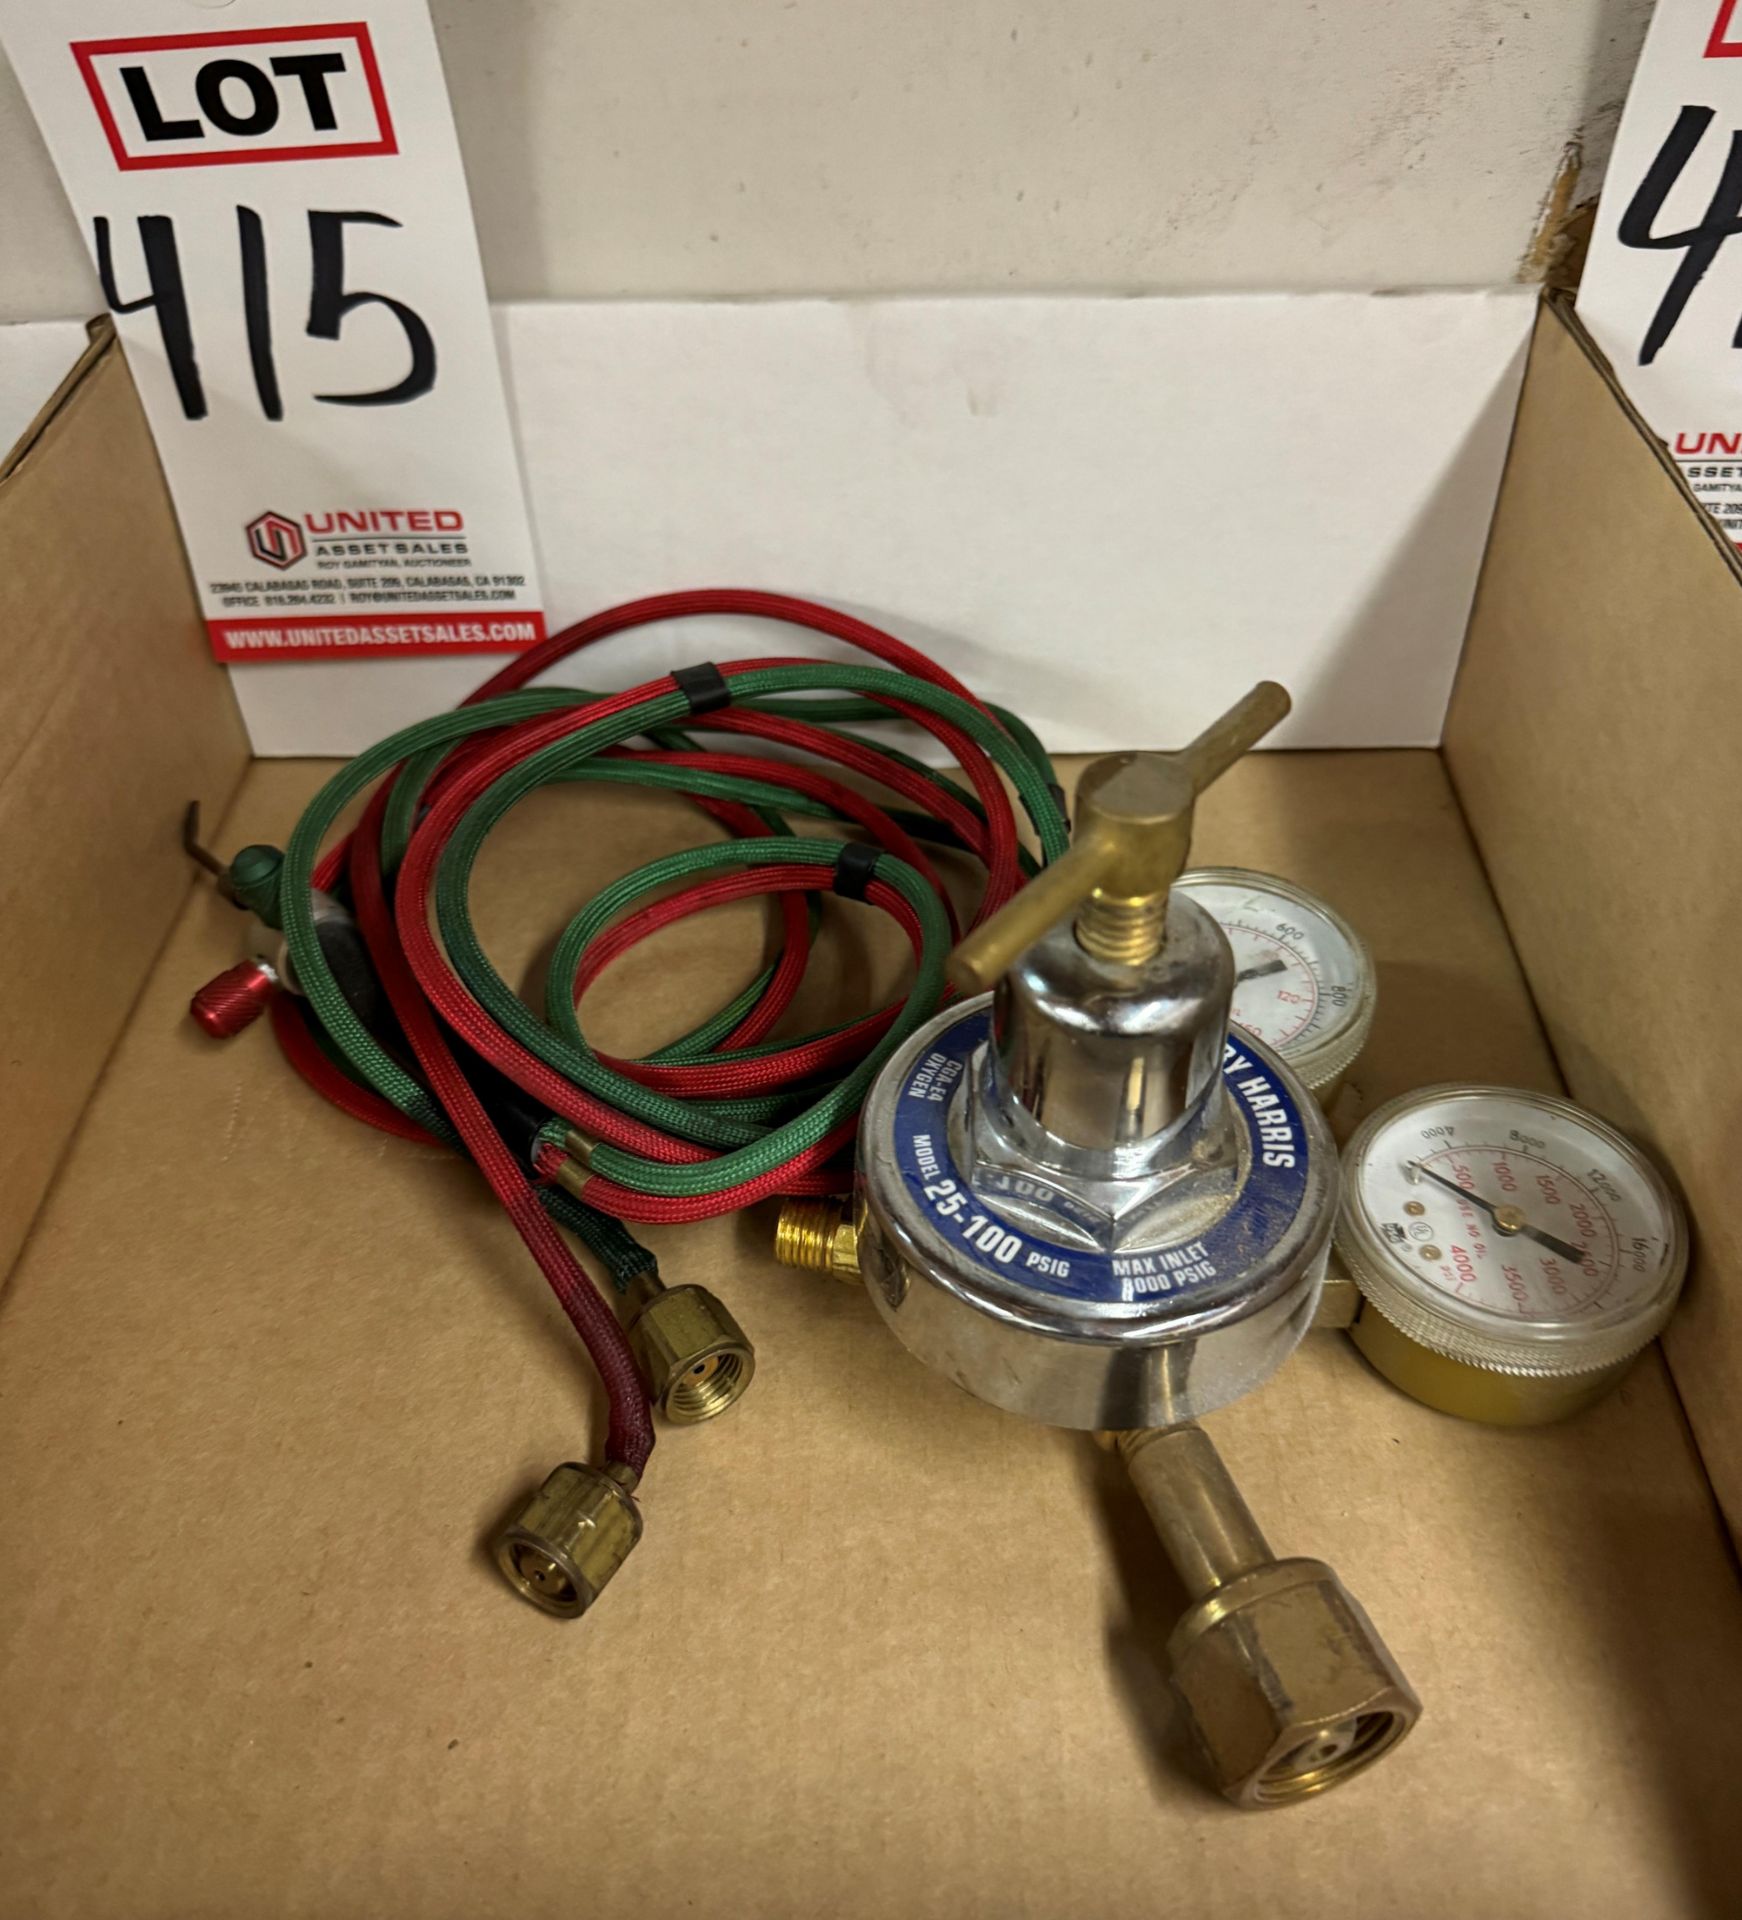 LOT - (1) MINI TORCH AND (1) GAUGE